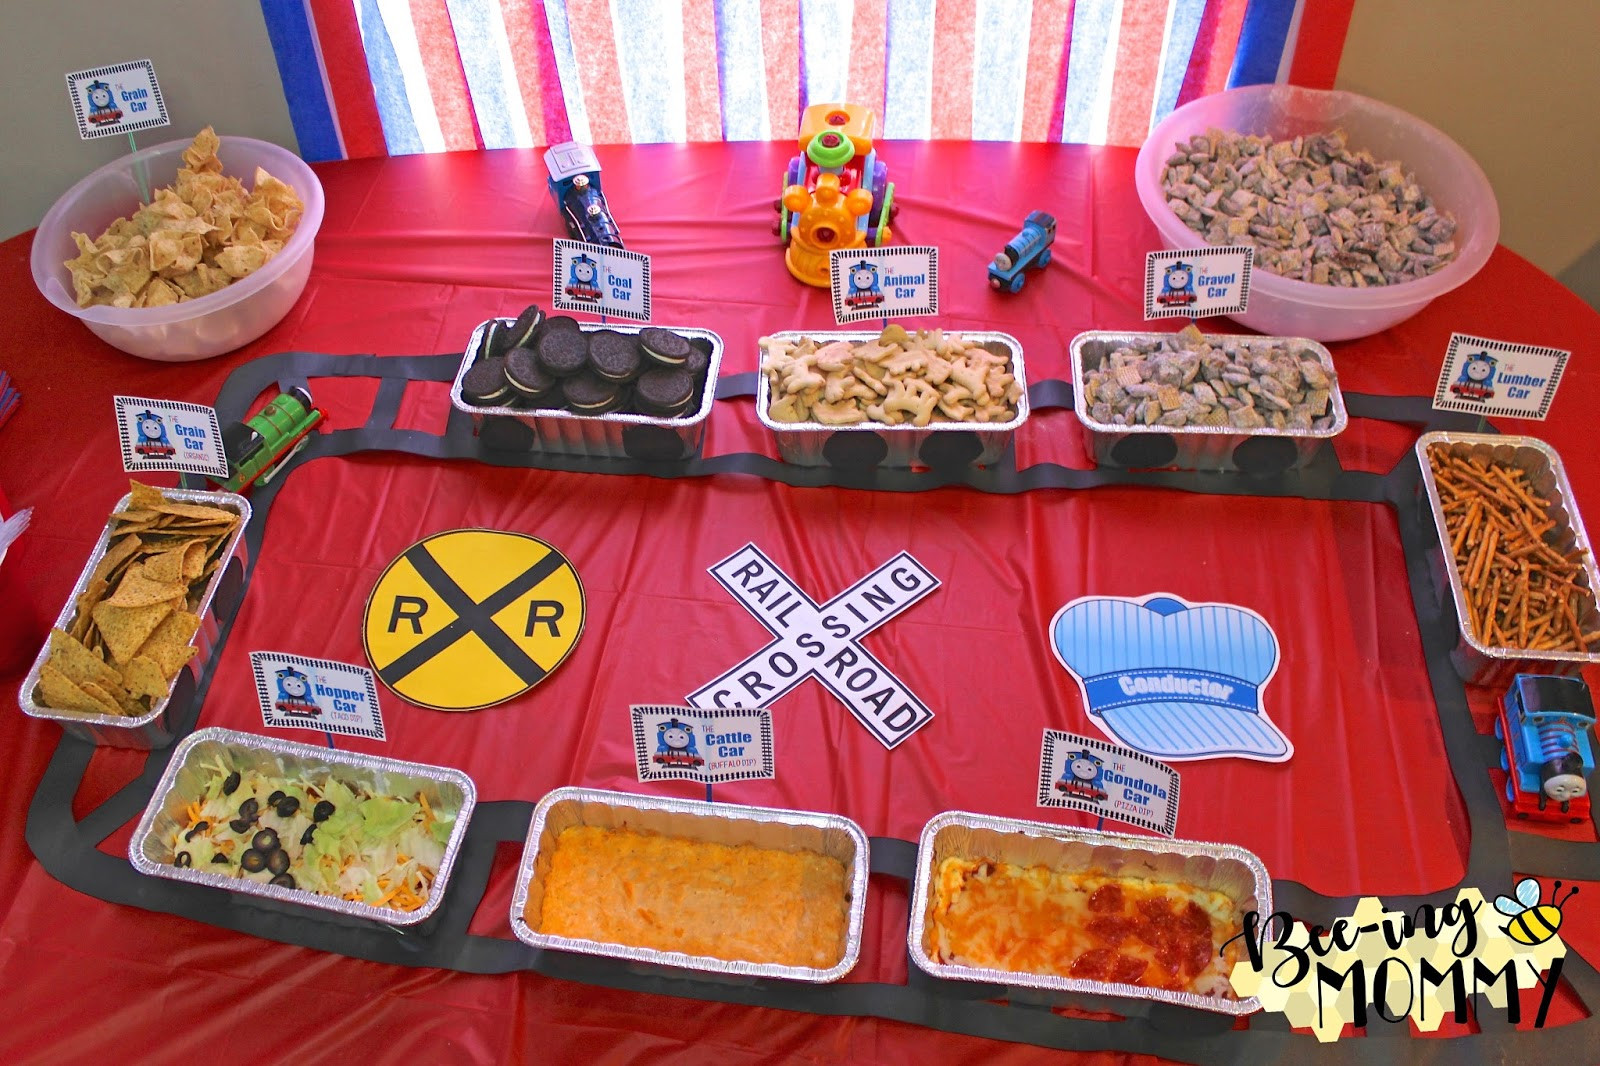 Thomas The Train Party Food Ideas
 Bee ing Mommy Blog Thomas the Train Birthday Party